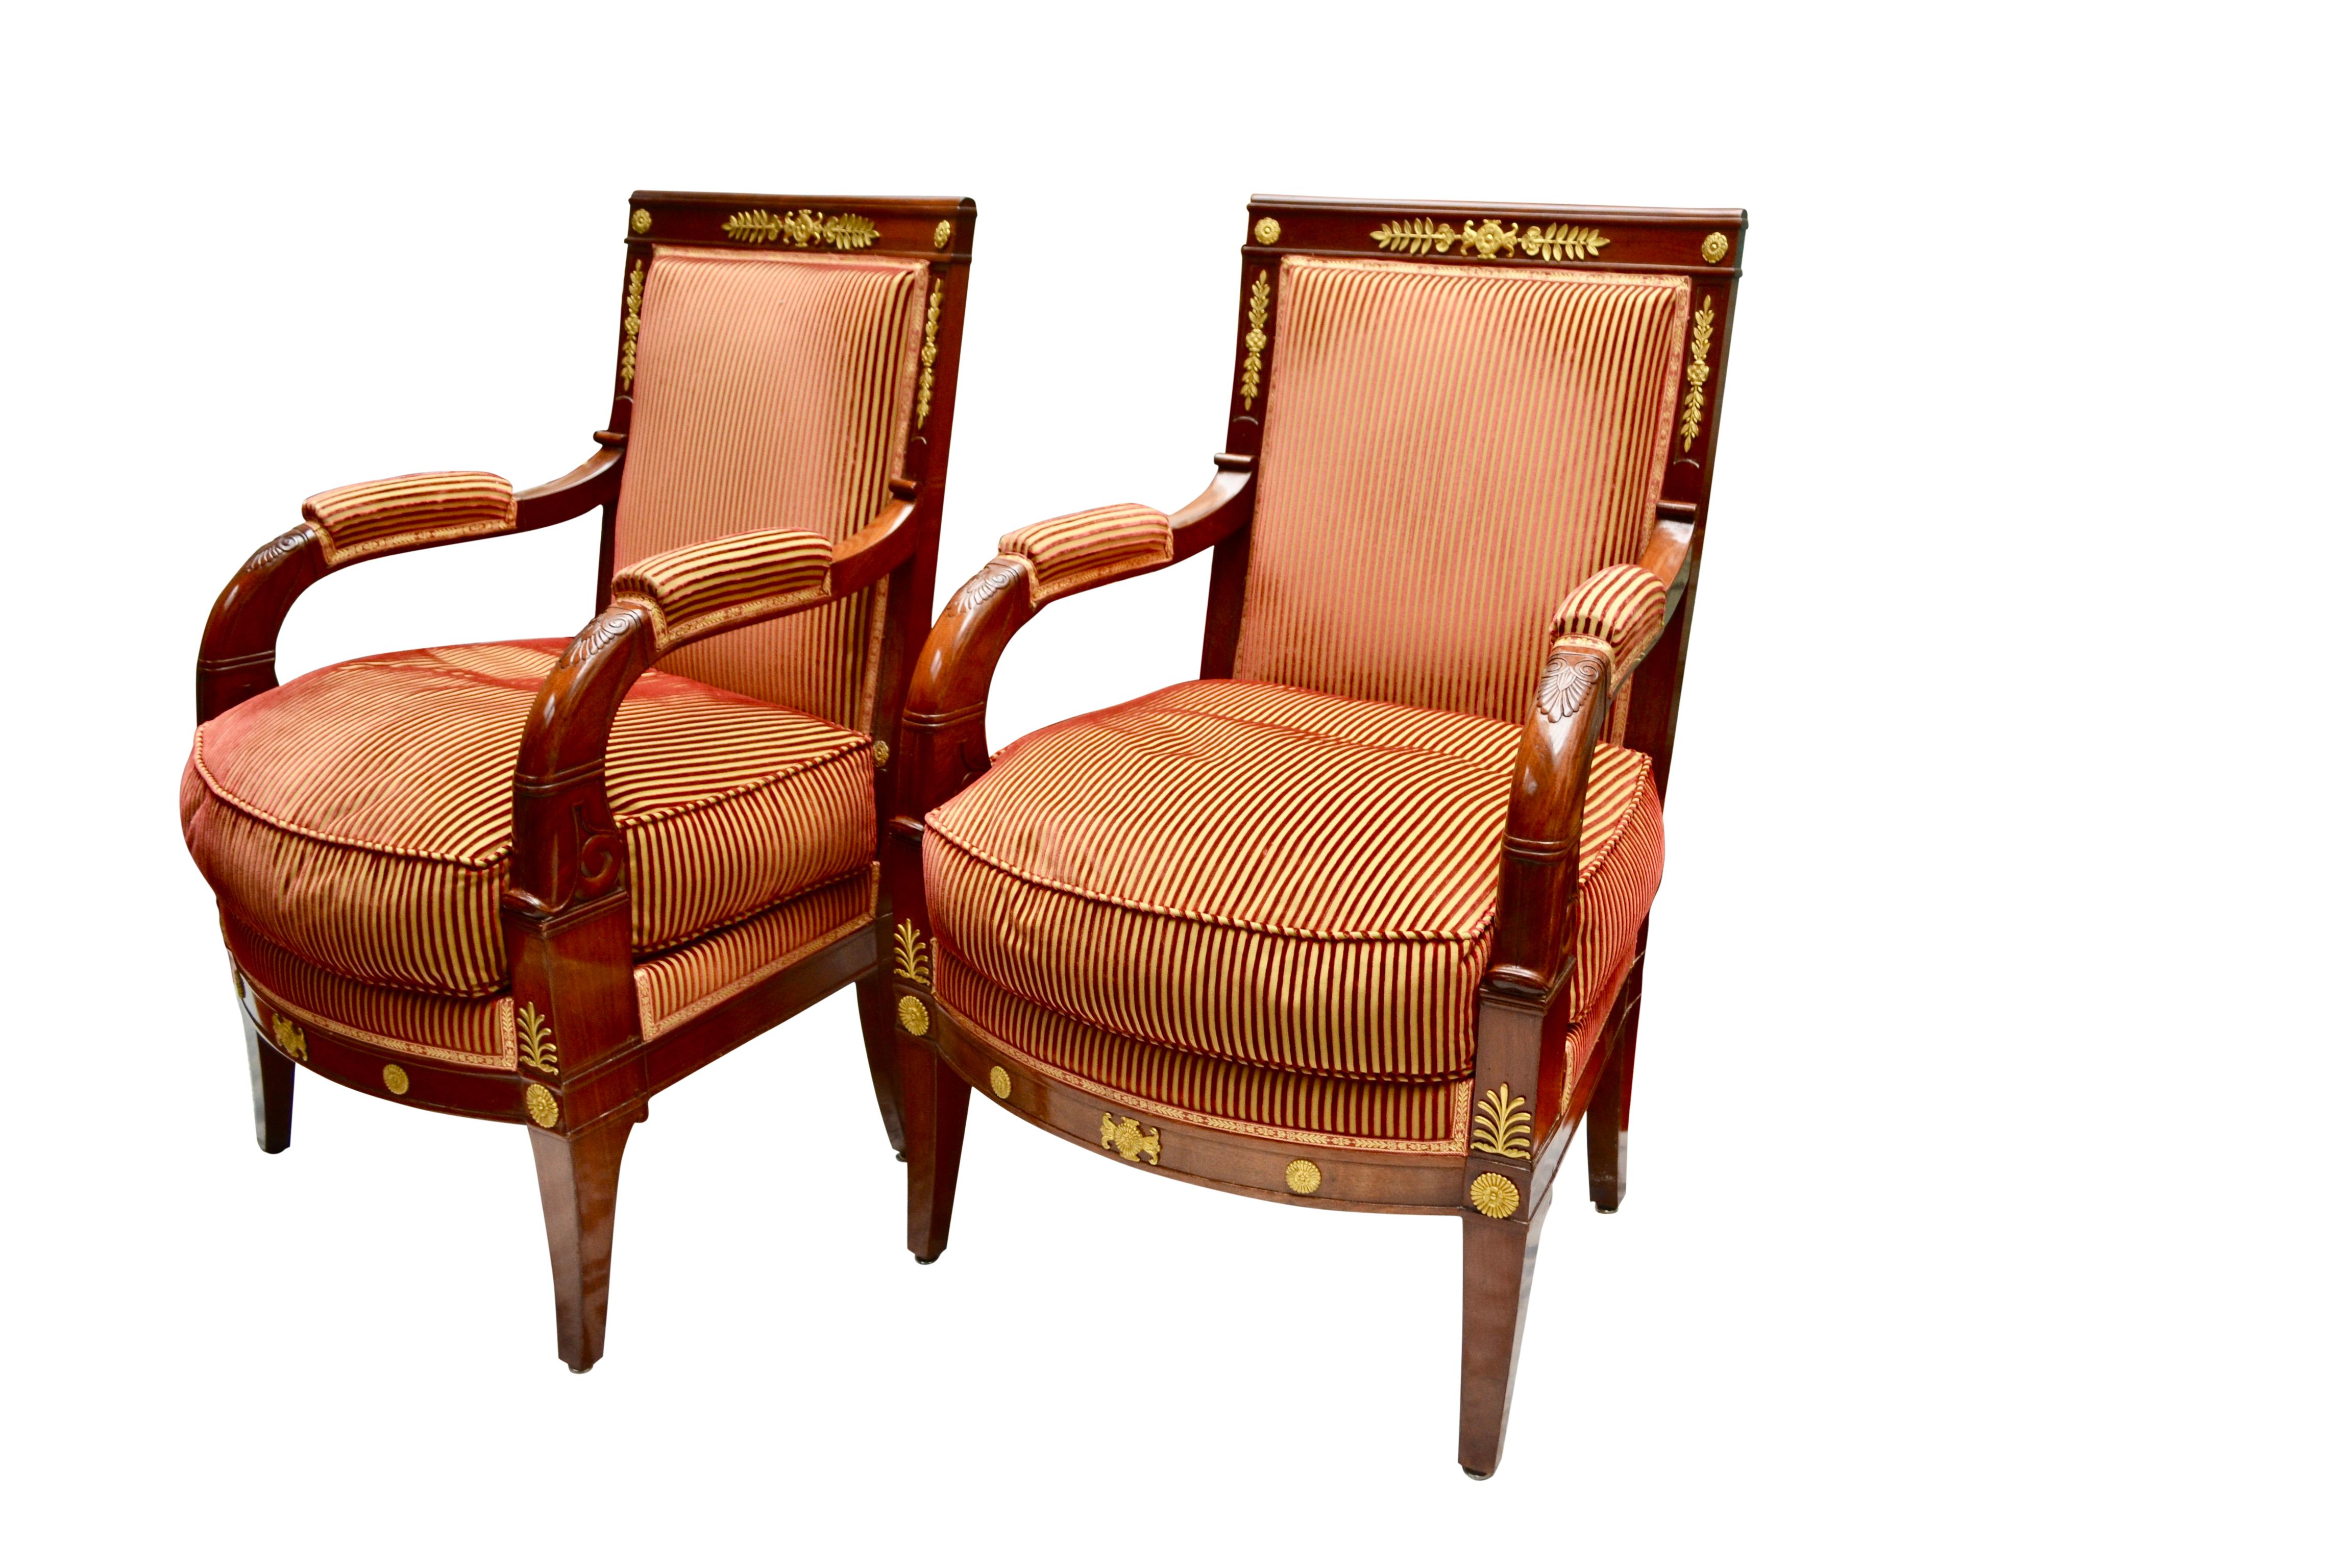 Gilt Pair of Early 19th Century French Empire Mahogany Armchairs called 